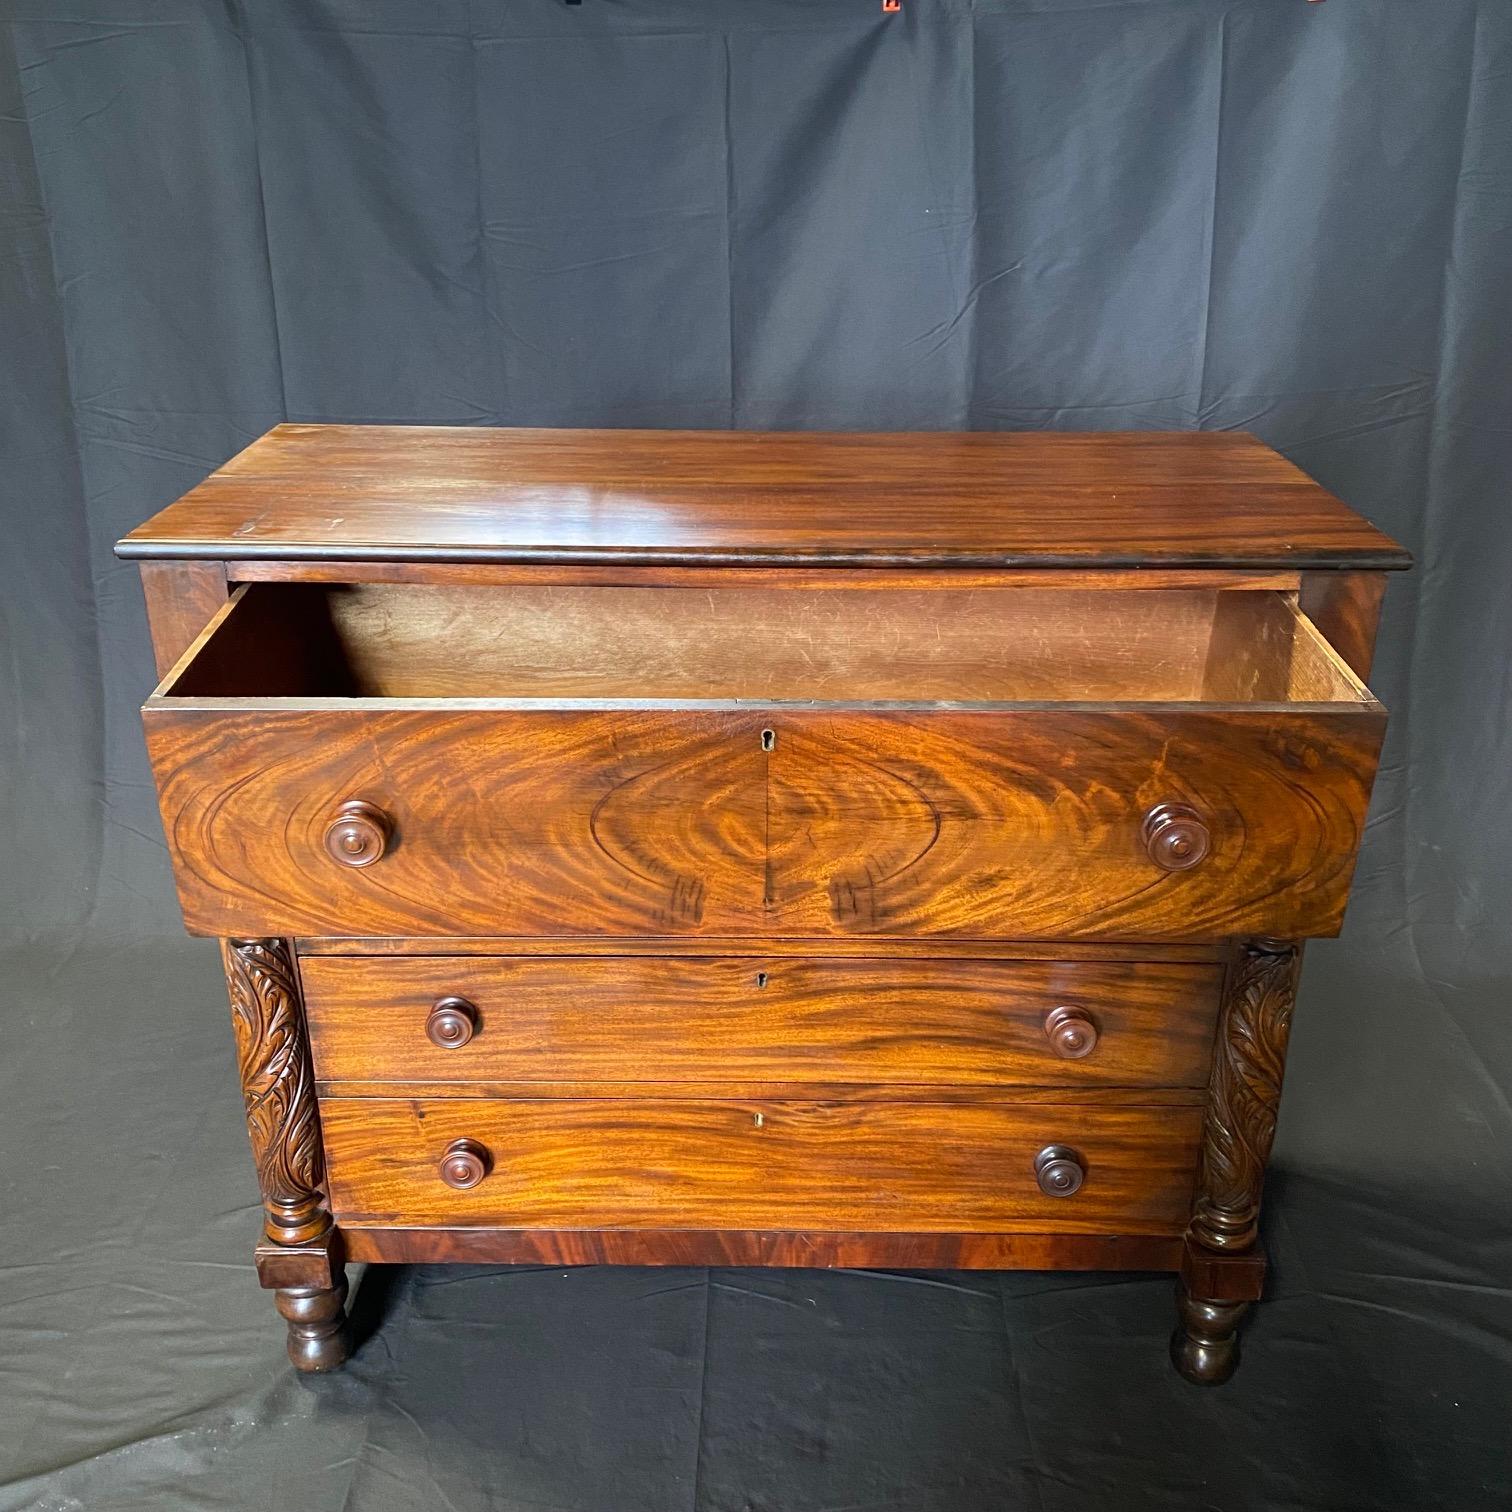 From the Federal period, a very beautiful American Neoclassical chest of drawers in fine bookmatched mahogany with one overhanging drawer supported on the sides by two beautifully turned and carved columns with acanthus leaves. Three more spacious